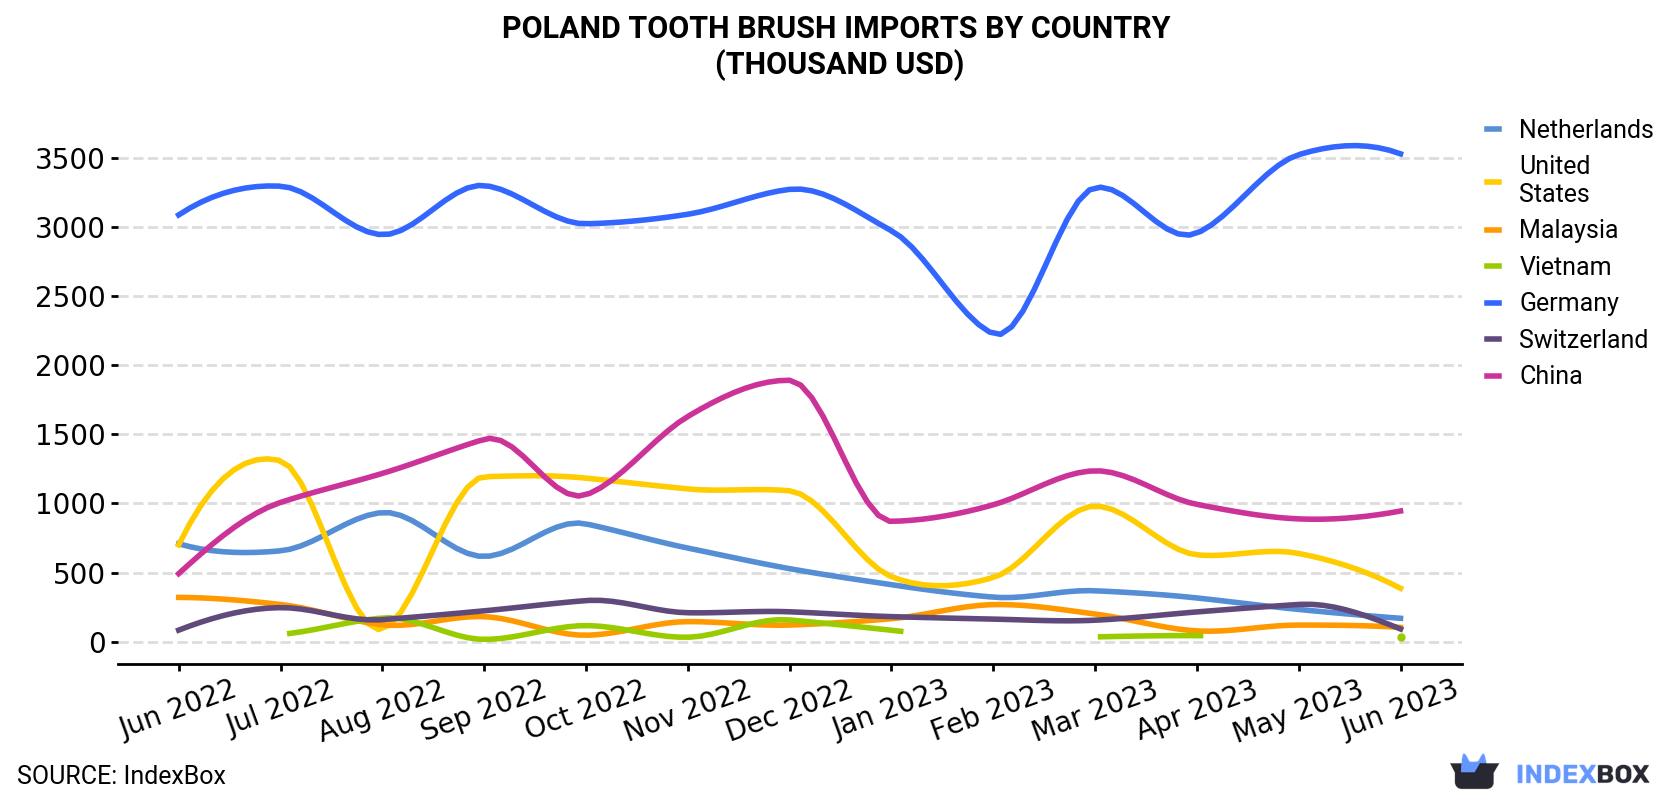 Poland Tooth Brush Imports By Country (Thousand USD)